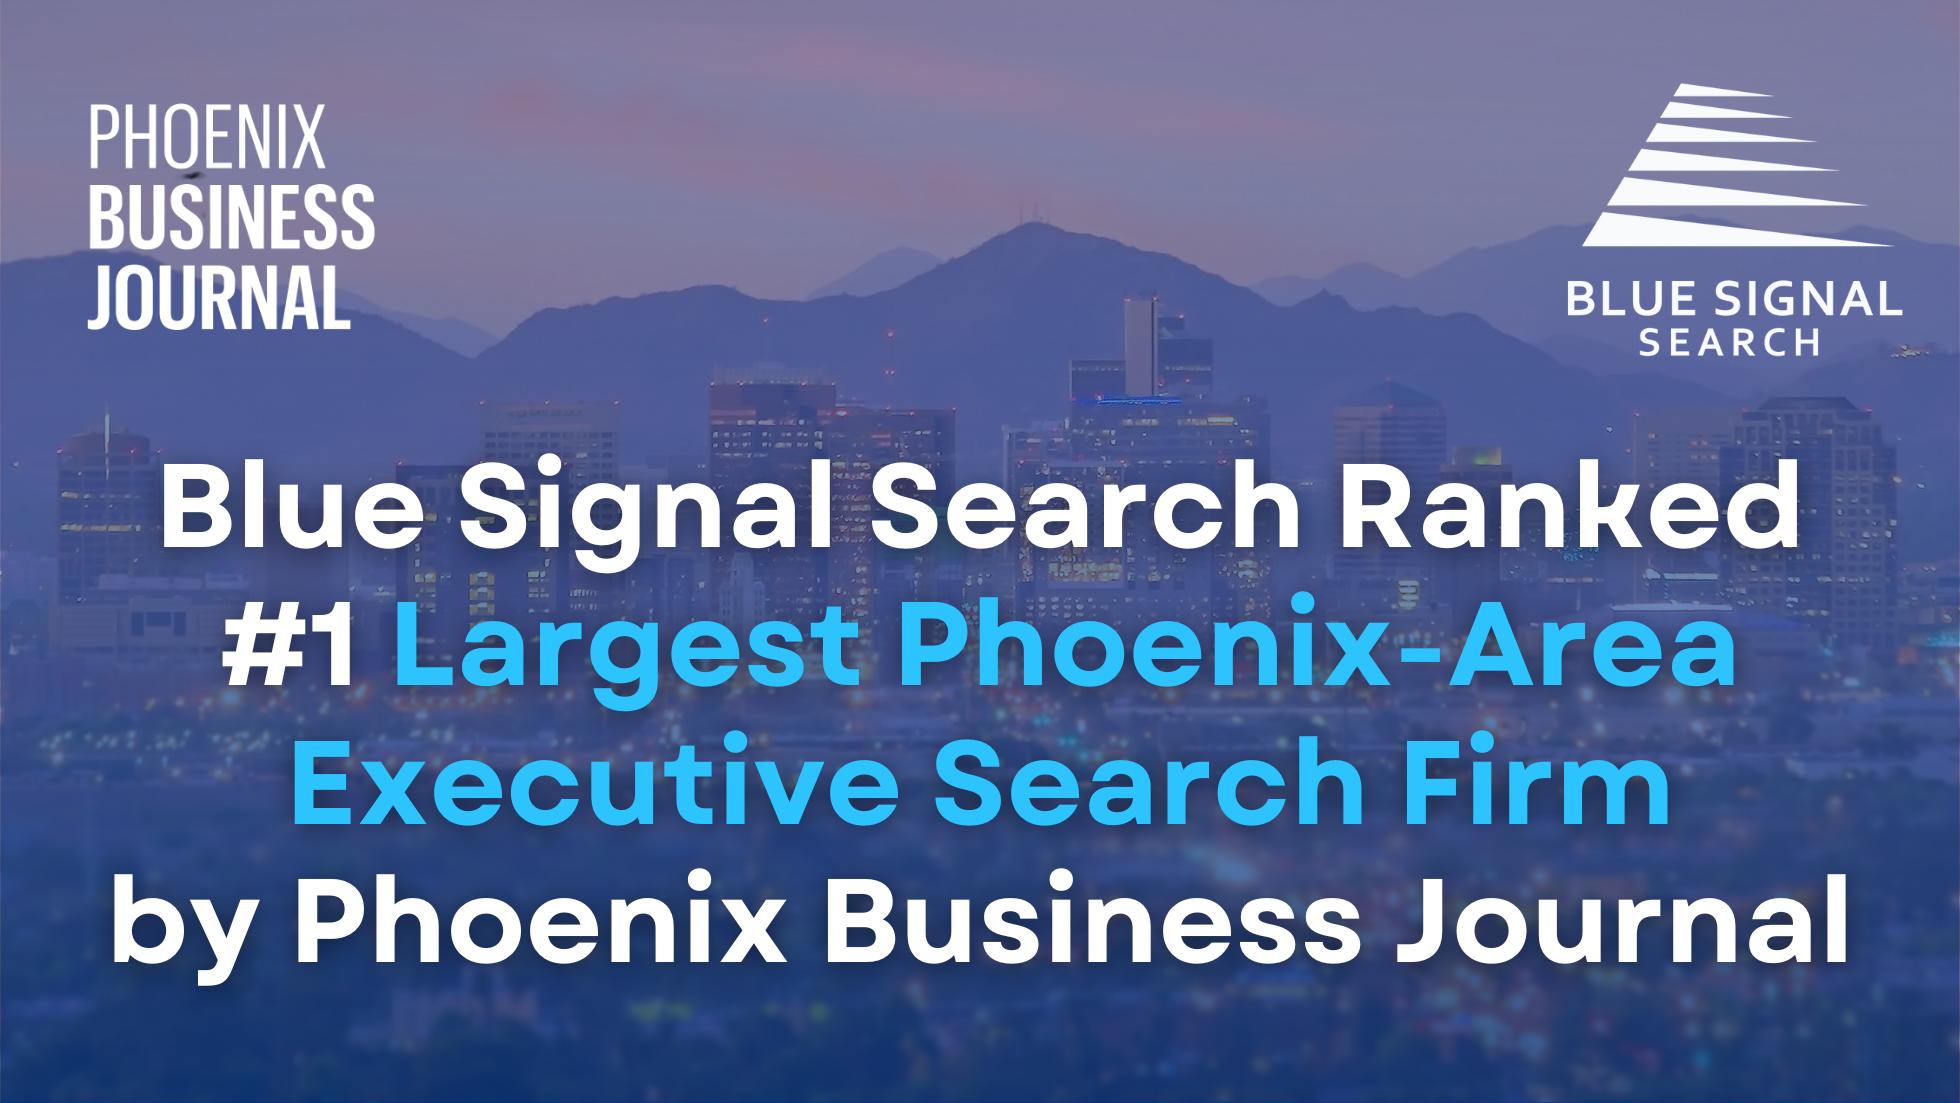 Blue Signal Search recognized as the #1 Largest Phoenix-Area Executive Search Firm by the Phoenix Business Journal, featuring the Phoenix skyline.